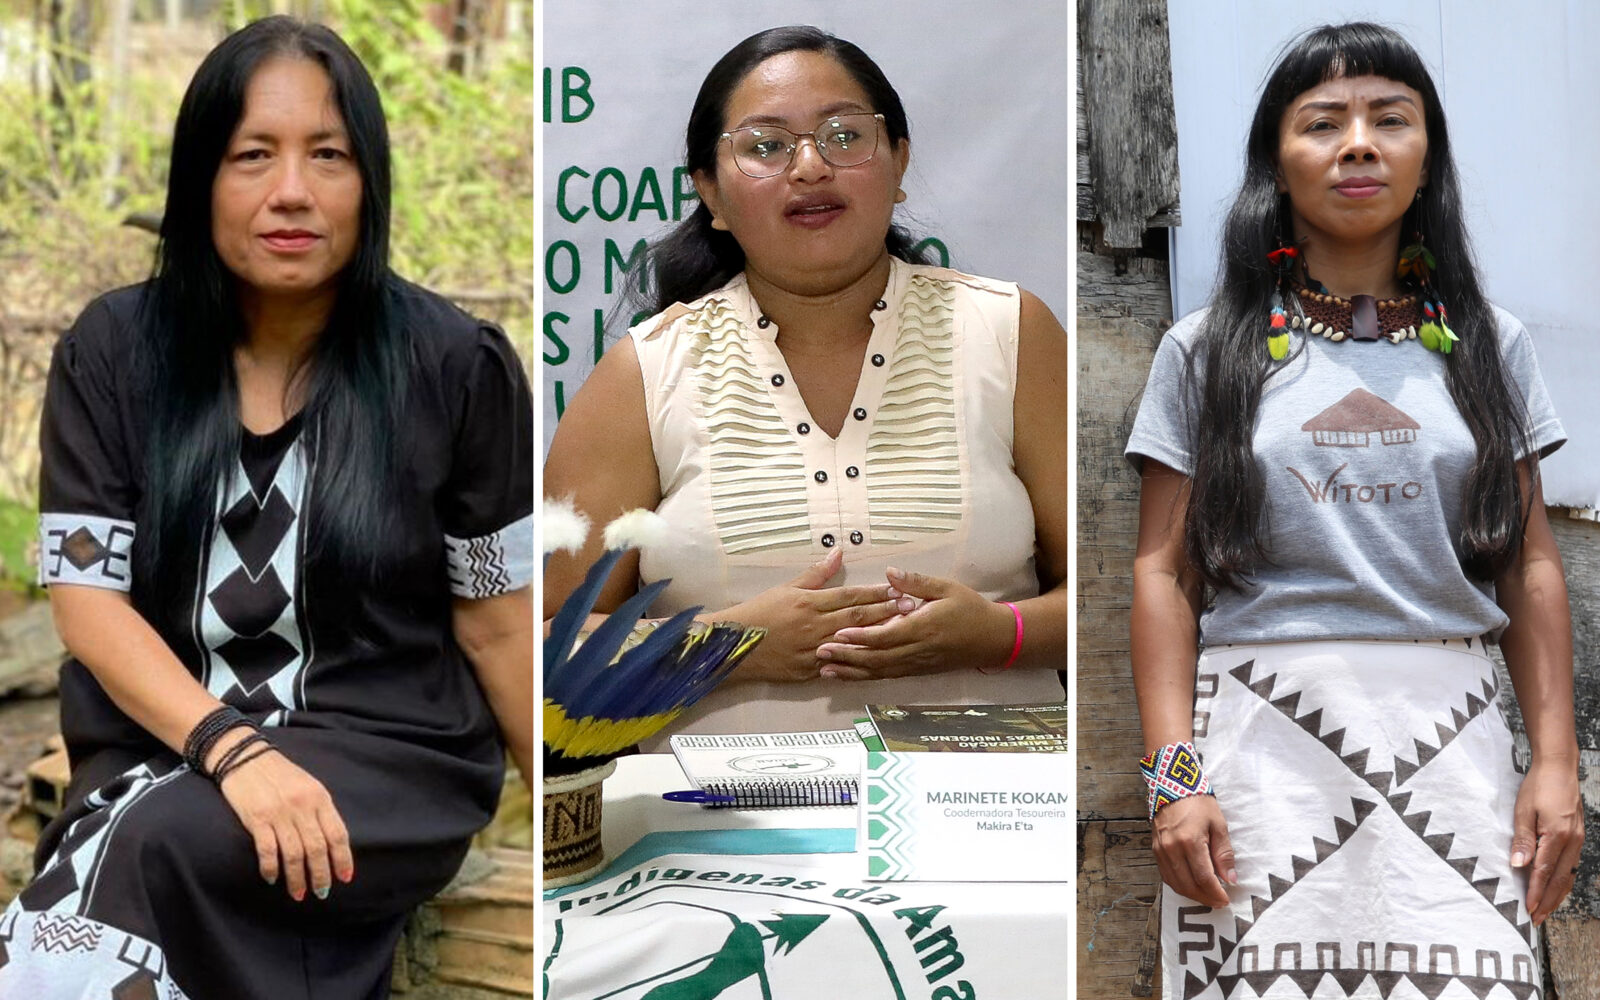 Meet 3 Women in Brazil Who Are Protecting the Amazon Rainforest — and Indigenous Rights